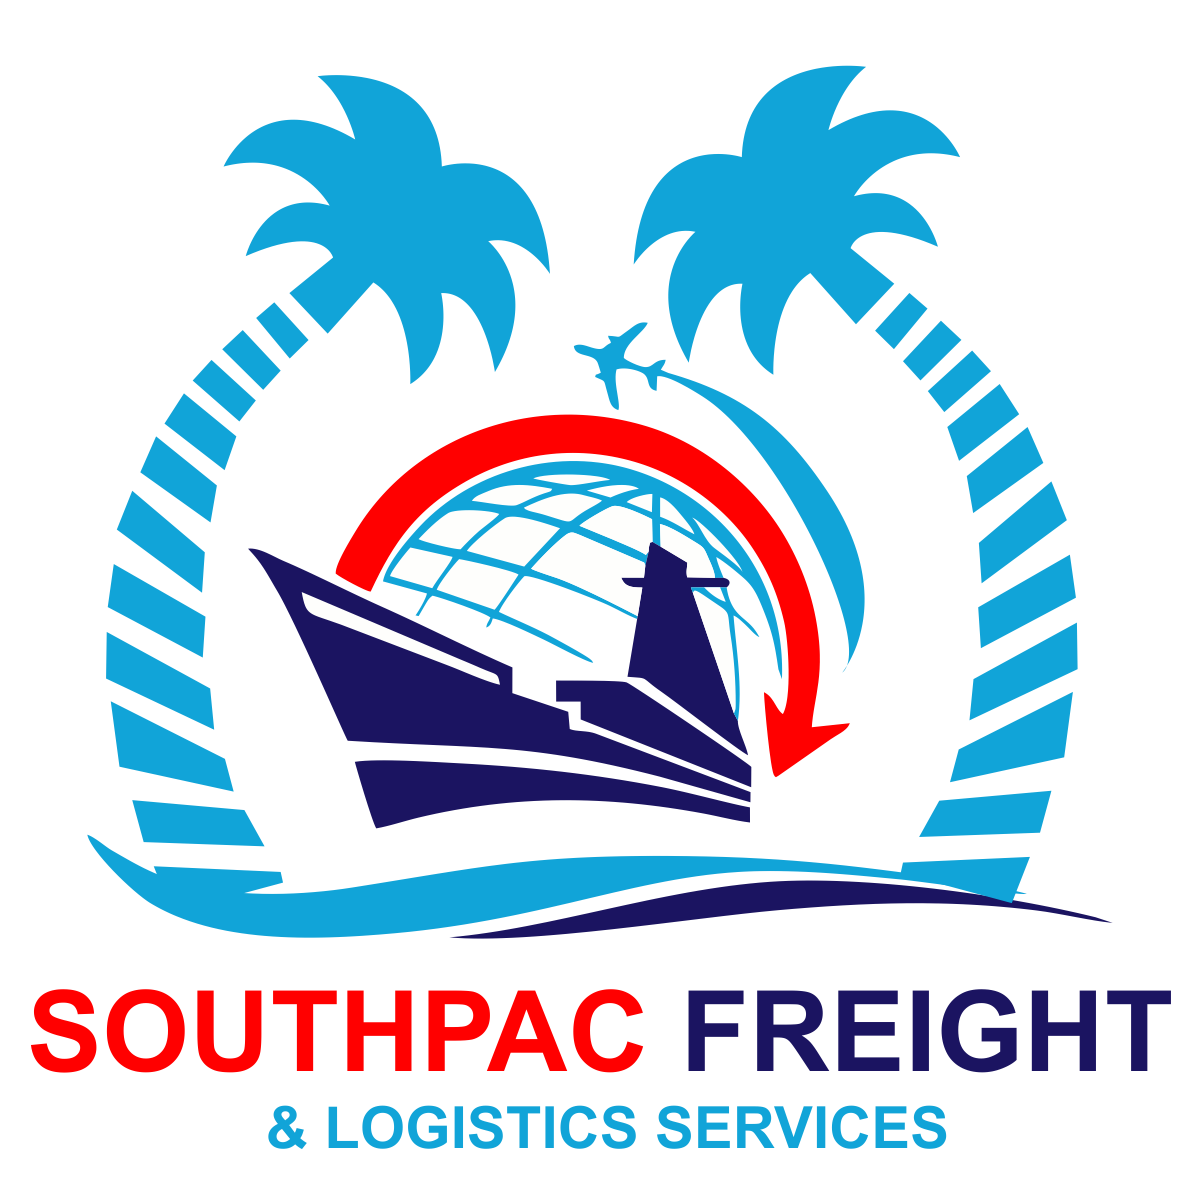 SOUTHPAC FREIGHT & LOGISTICS SERVICES